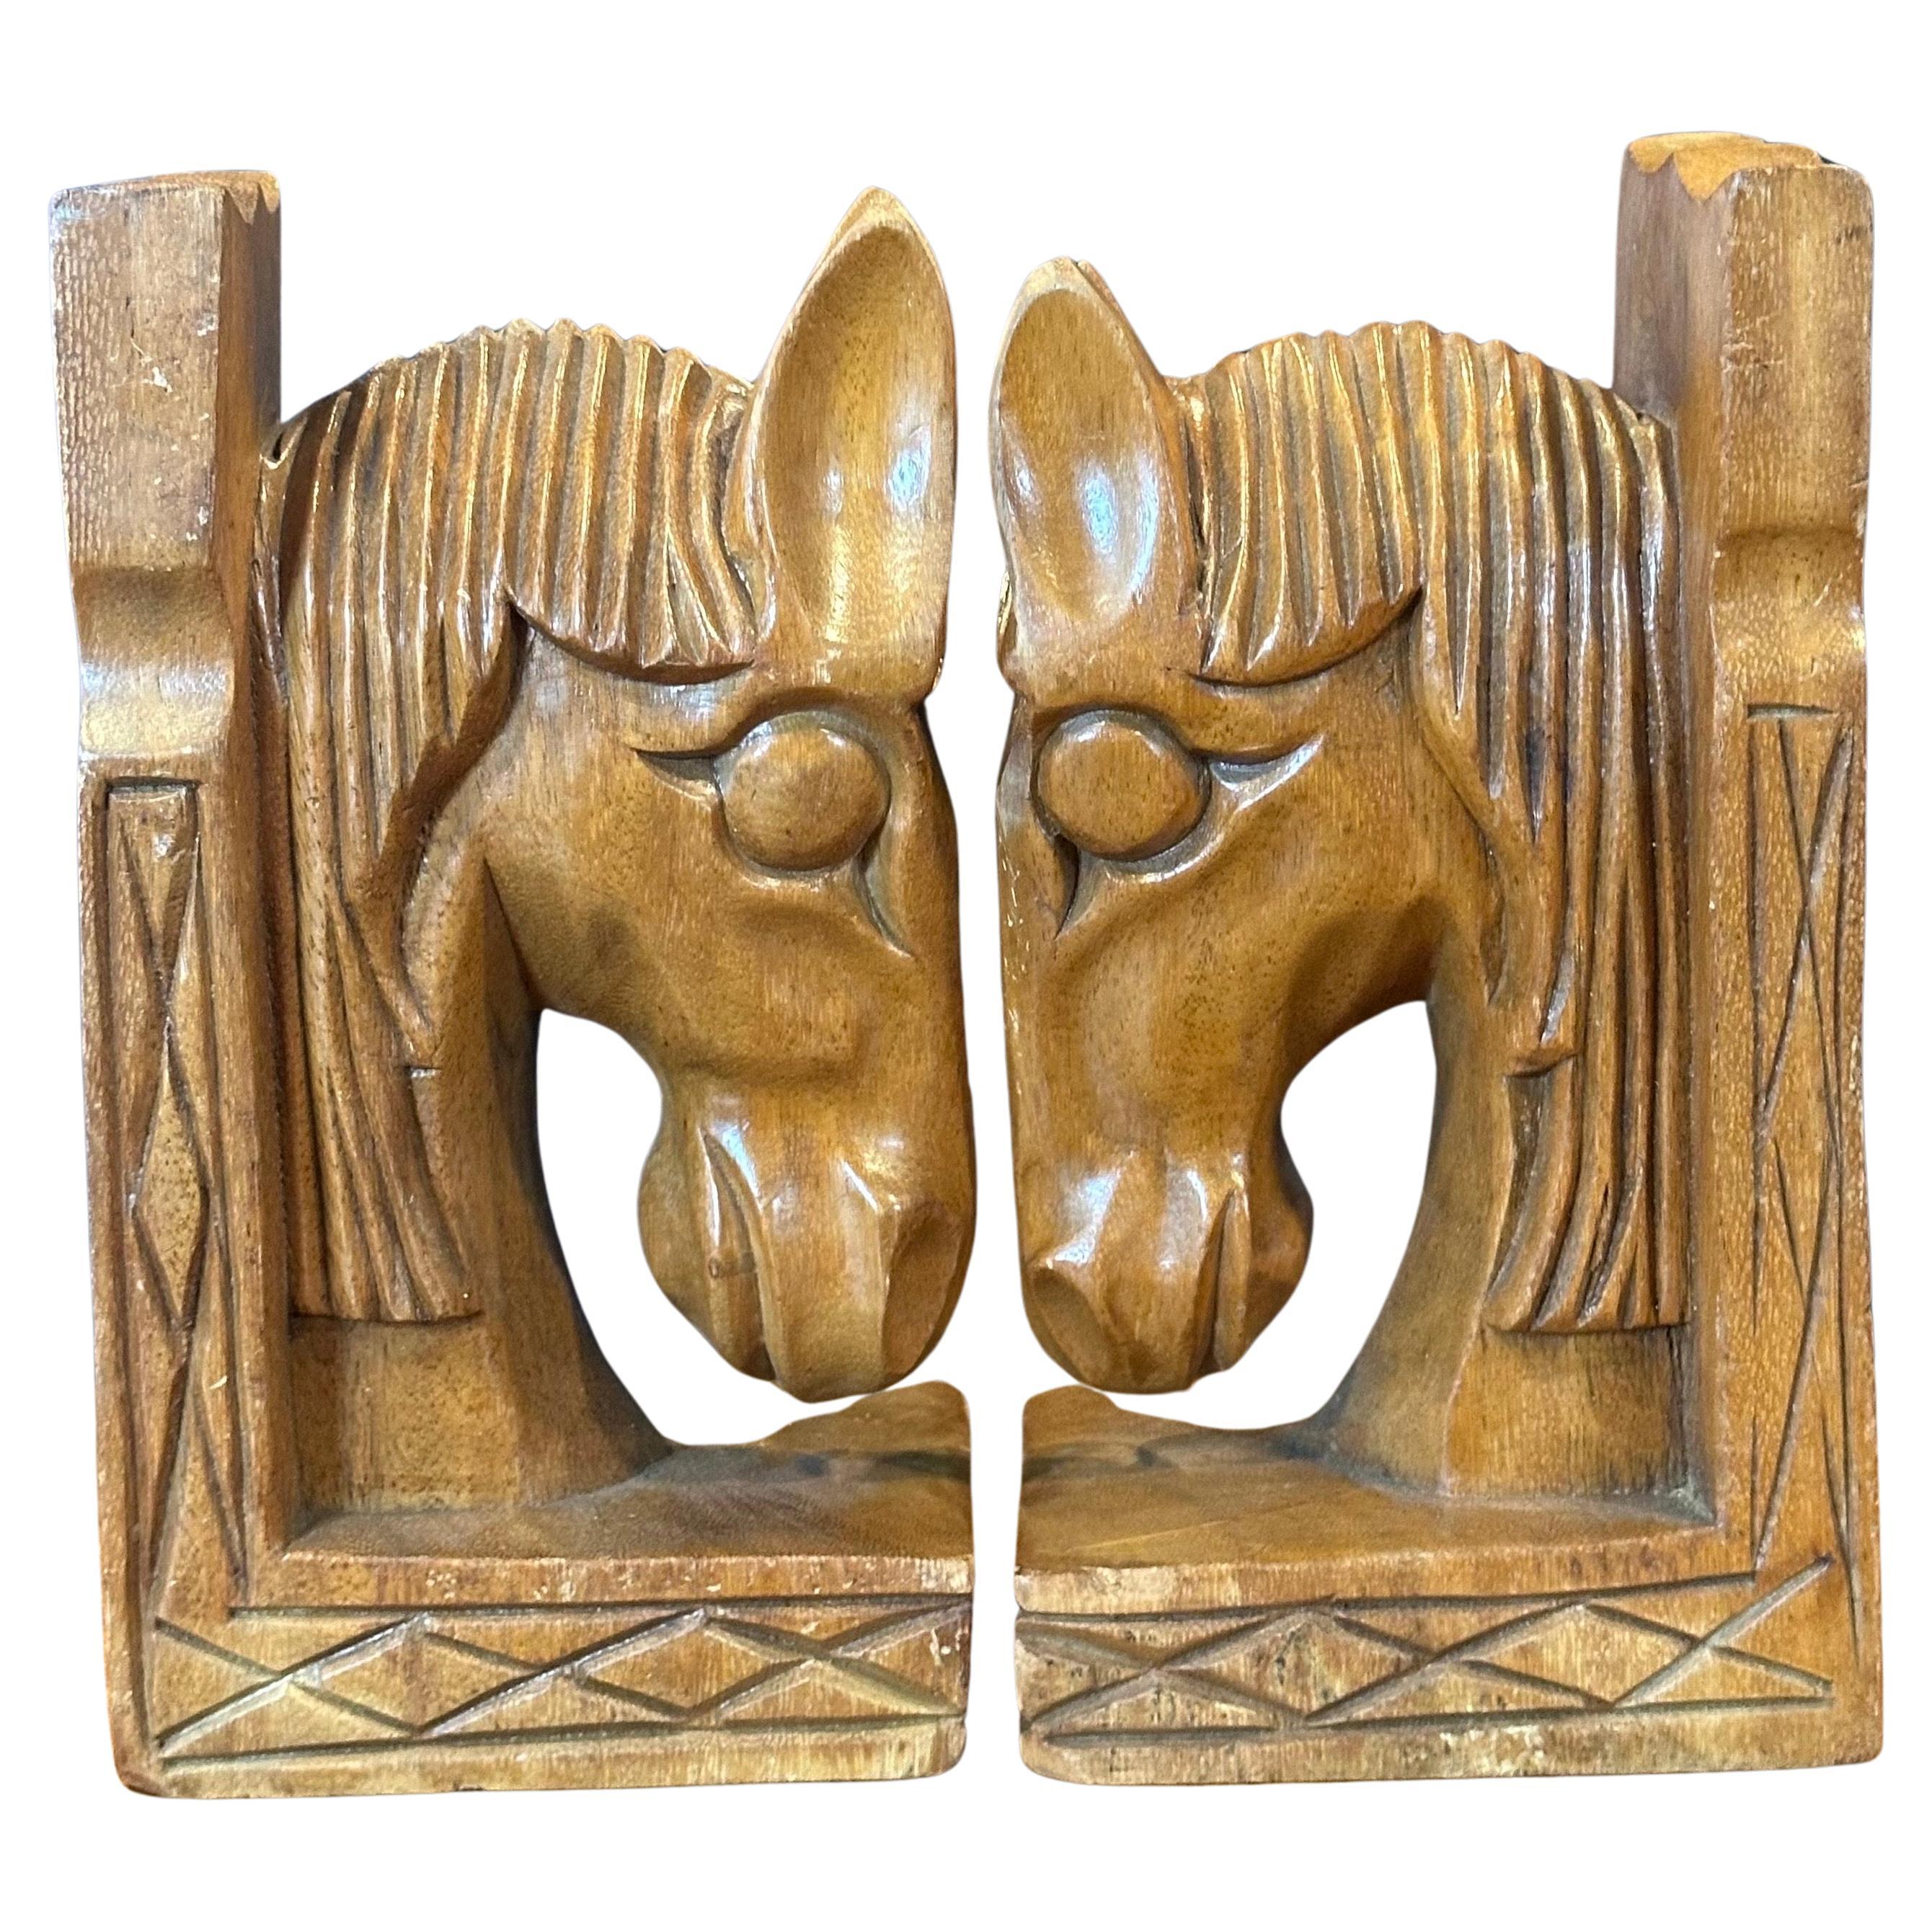 A very nice pair of mid-century hand carved mahogany horse head bookends, circa 1970s. The bookends are heavy, solid and well crafted. They measure 11